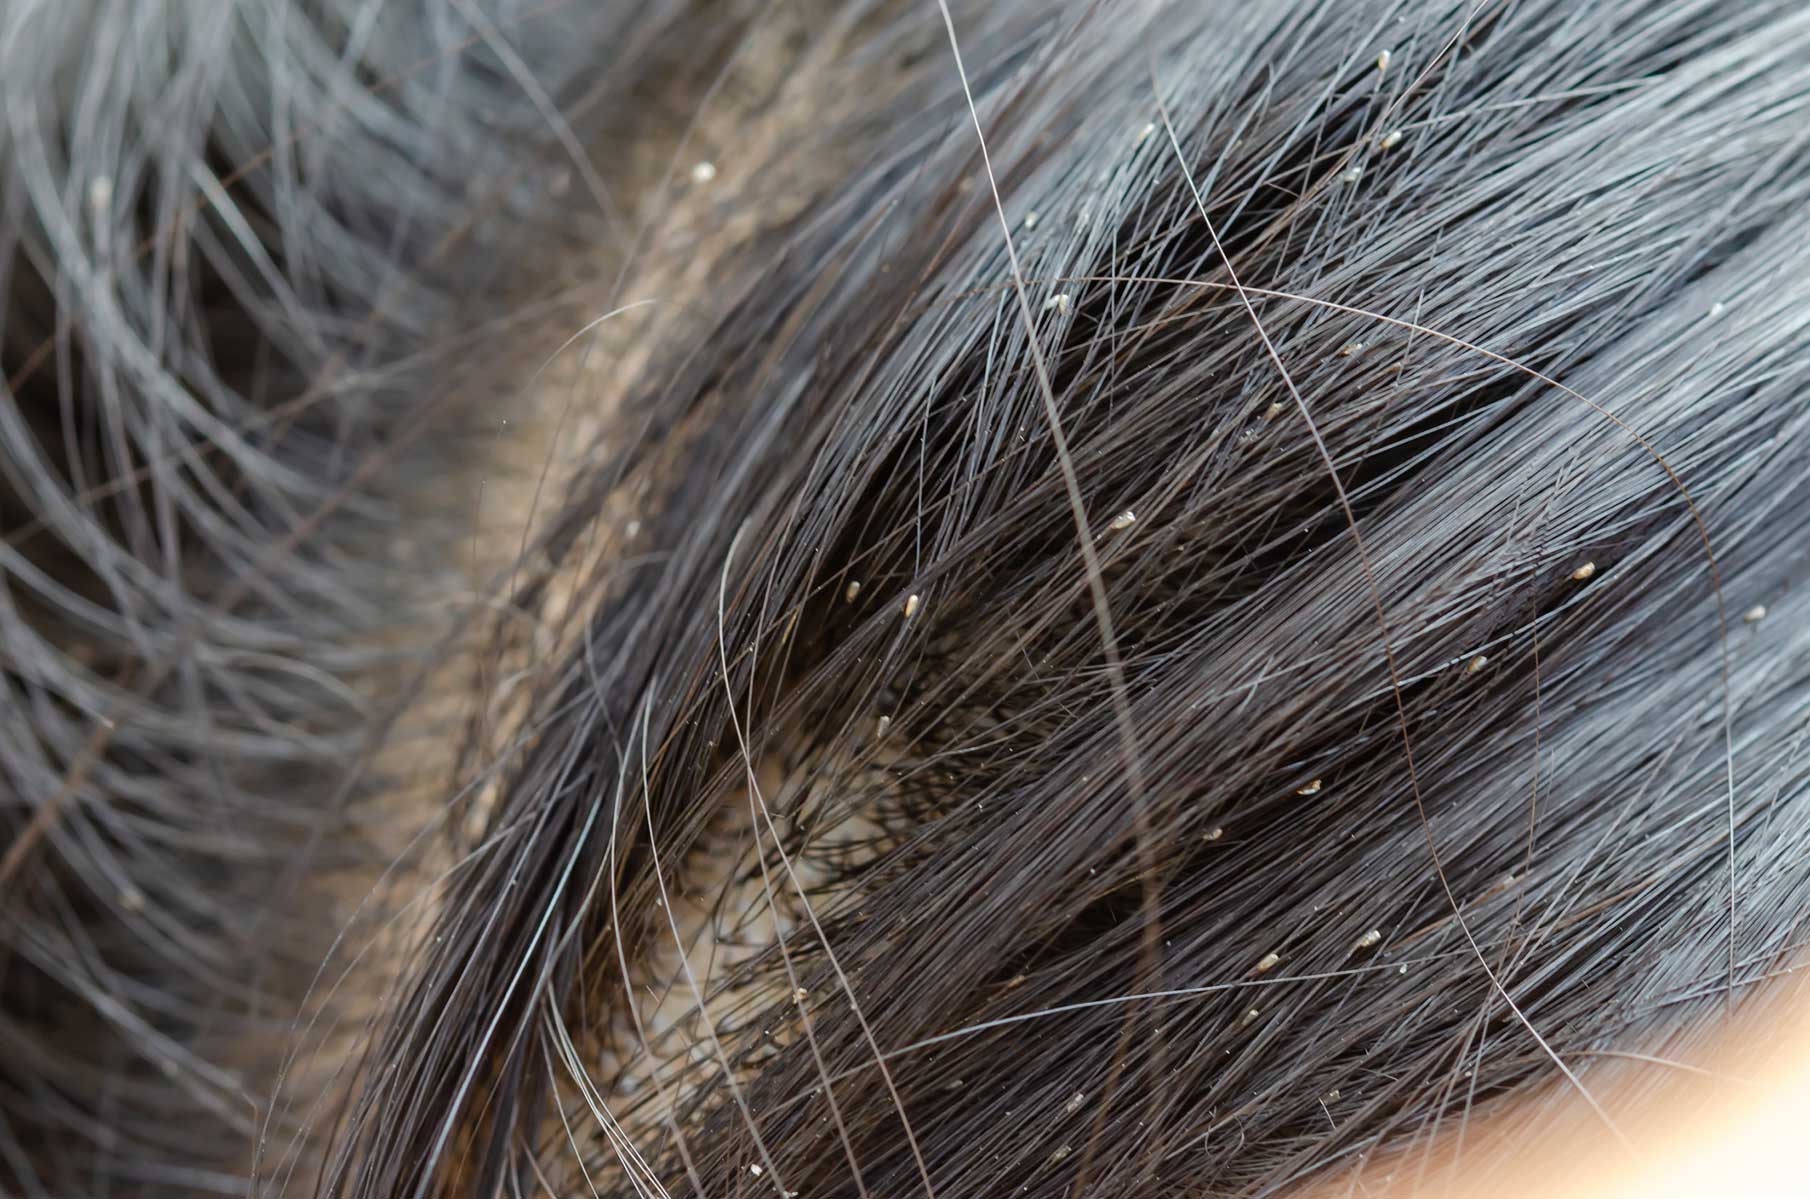 1. How to Detect and Remove Nits from Blonde Hair - wide 5